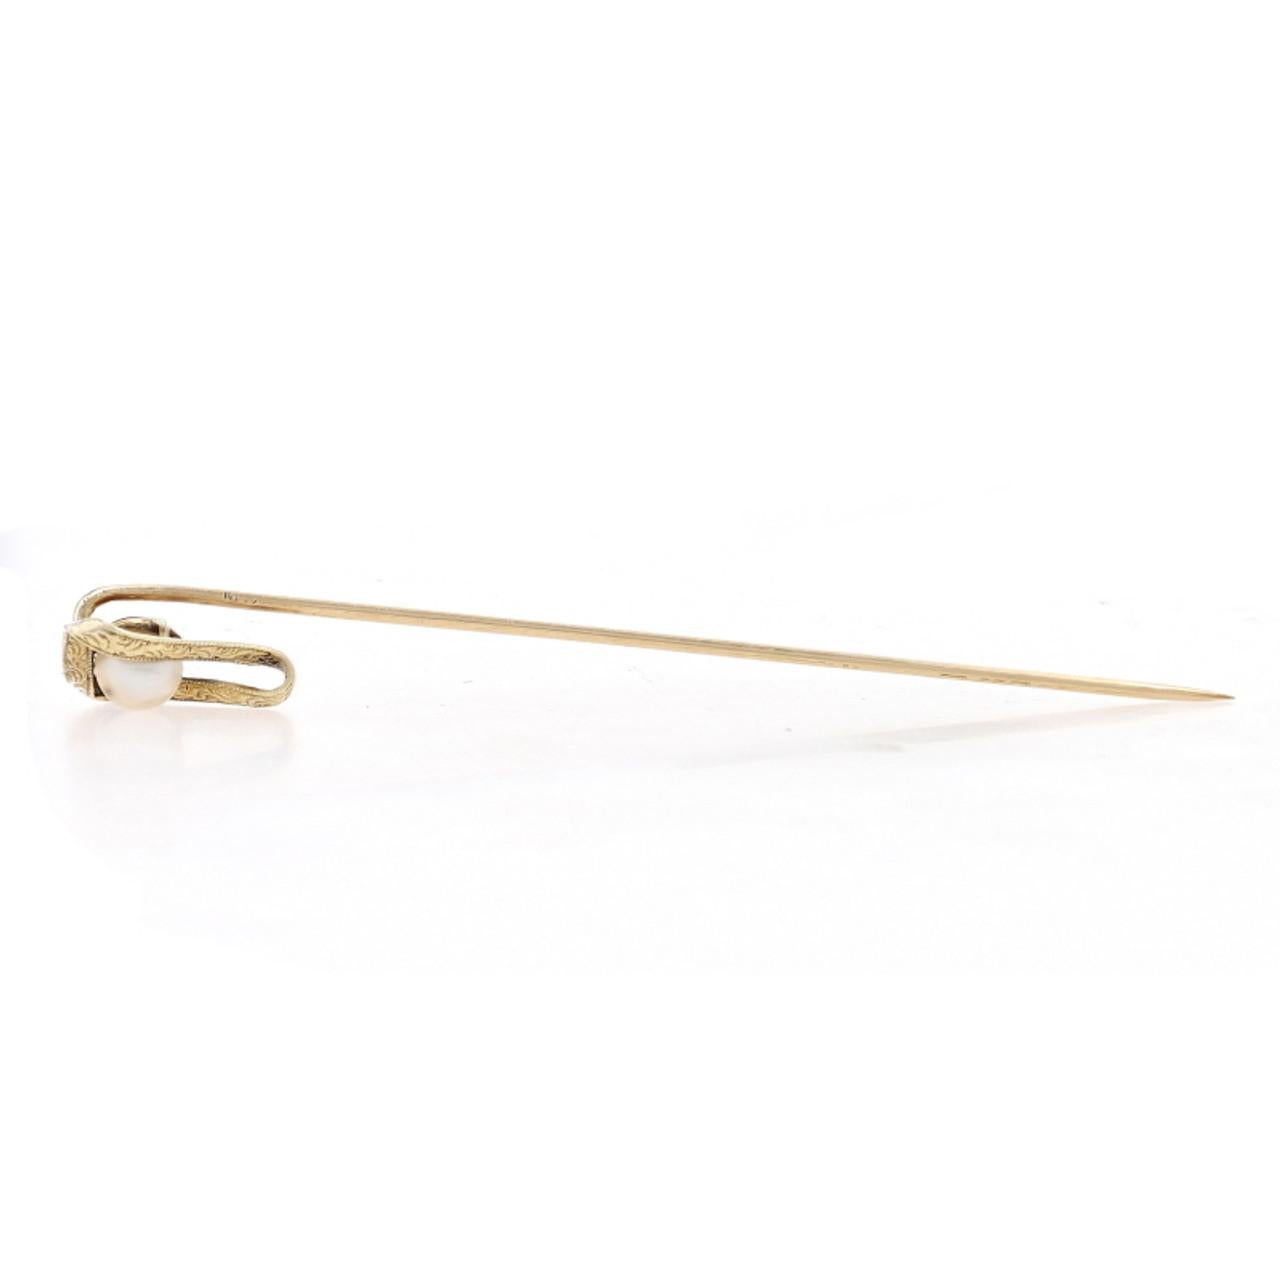 Yellow Gold Pearl Edwardian Triangle Solitaire Stickpin 14k Milgrain Antique, 1900s-1910s

Stone Information:
Natural Pearl
Diameter: 5.3mm

Additional Information:
Material: Metal 14k Yellow Gold
Style: Solitaire
Theme: Triangle
Era: